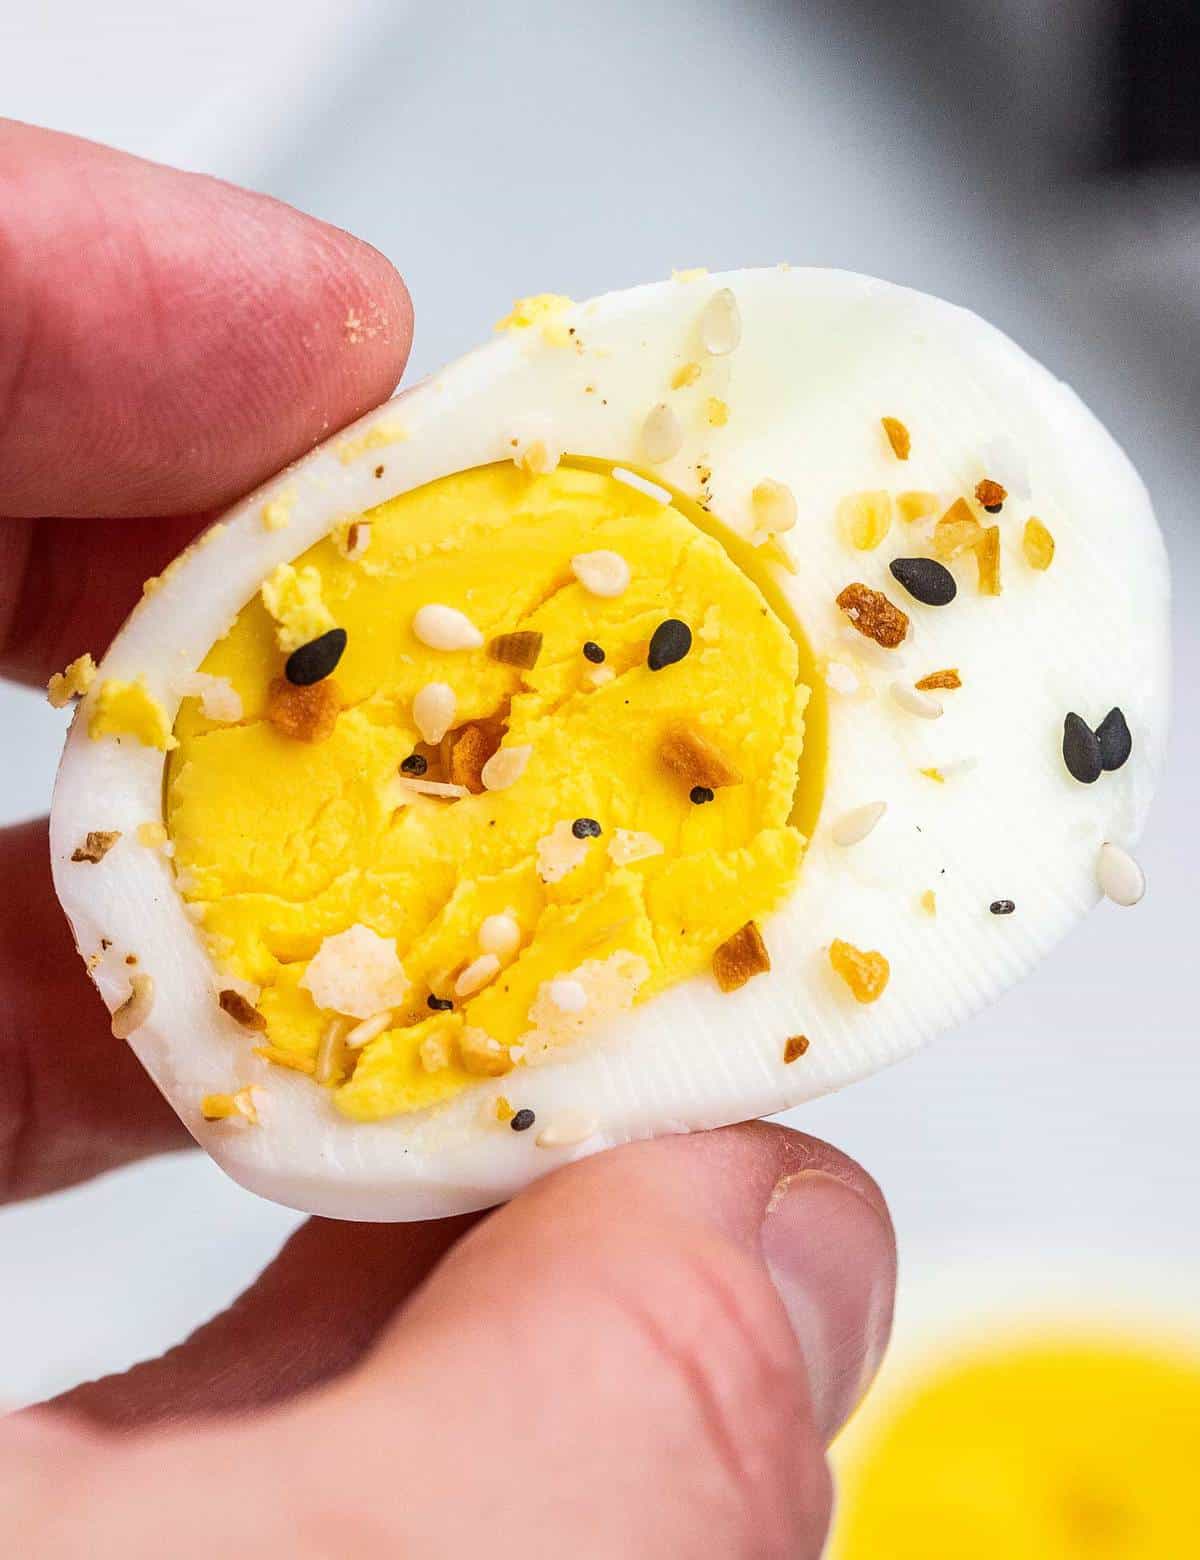 https://www.thechunkychef.com/wp-content/uploads/2021/03/Instant-Pot-Hard-Boiled-Eggs-feat.jpg